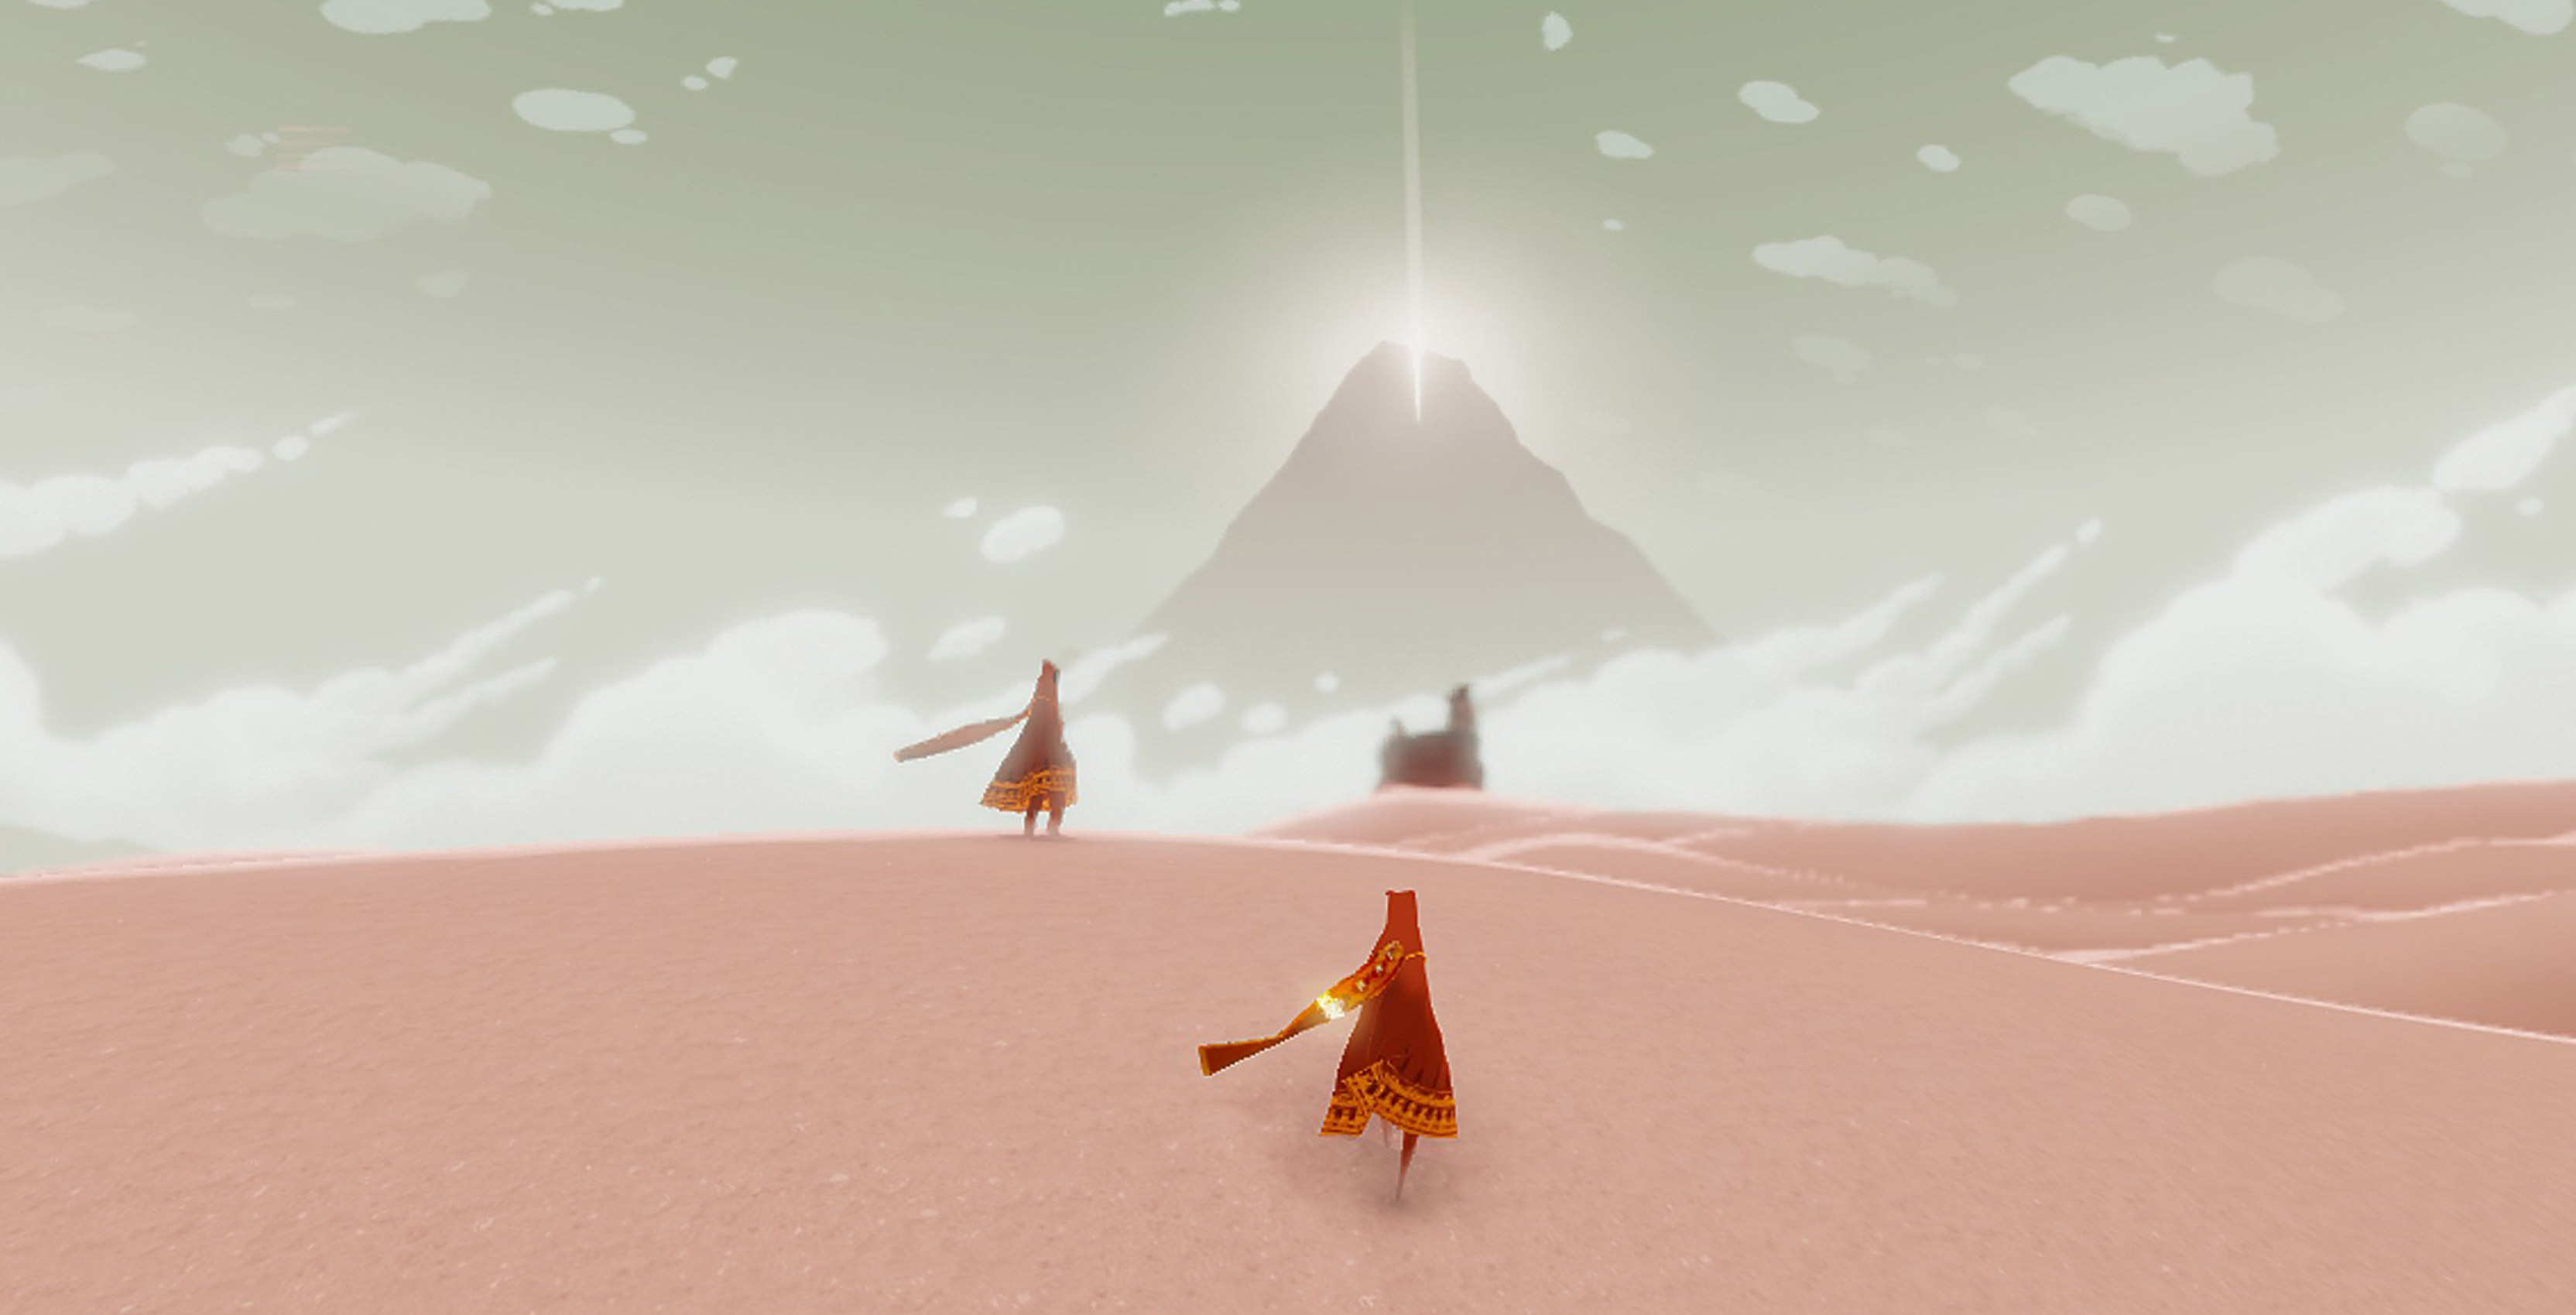 Journey is now available on iOS